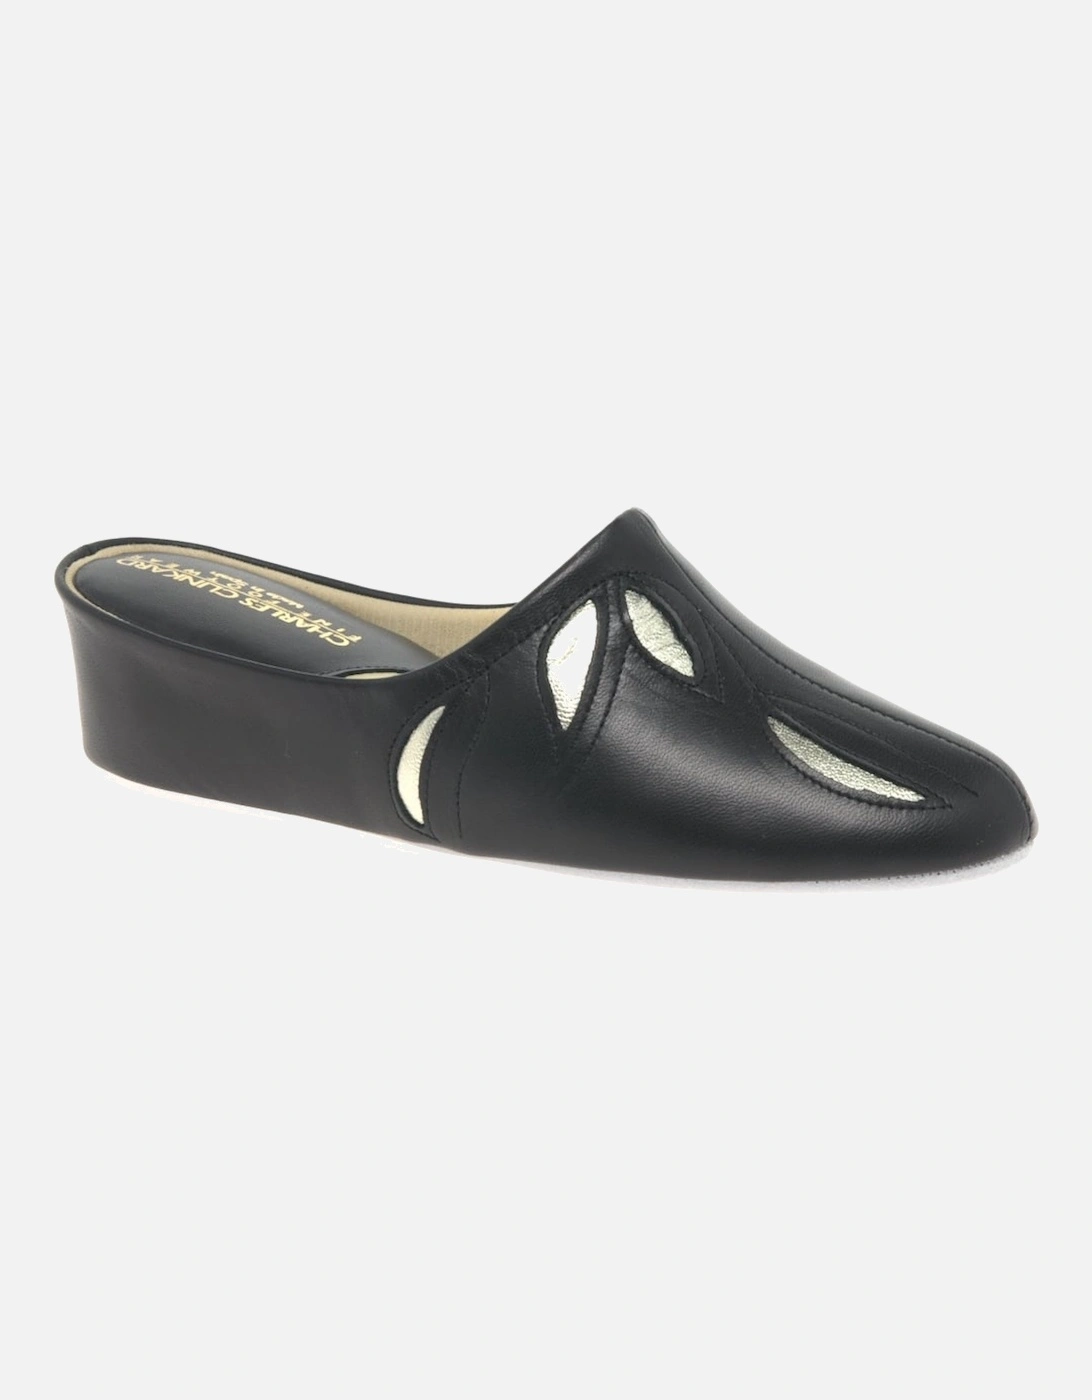 Relax Slippers Molly Black Leather Slipper Colour: Black, Size: 8